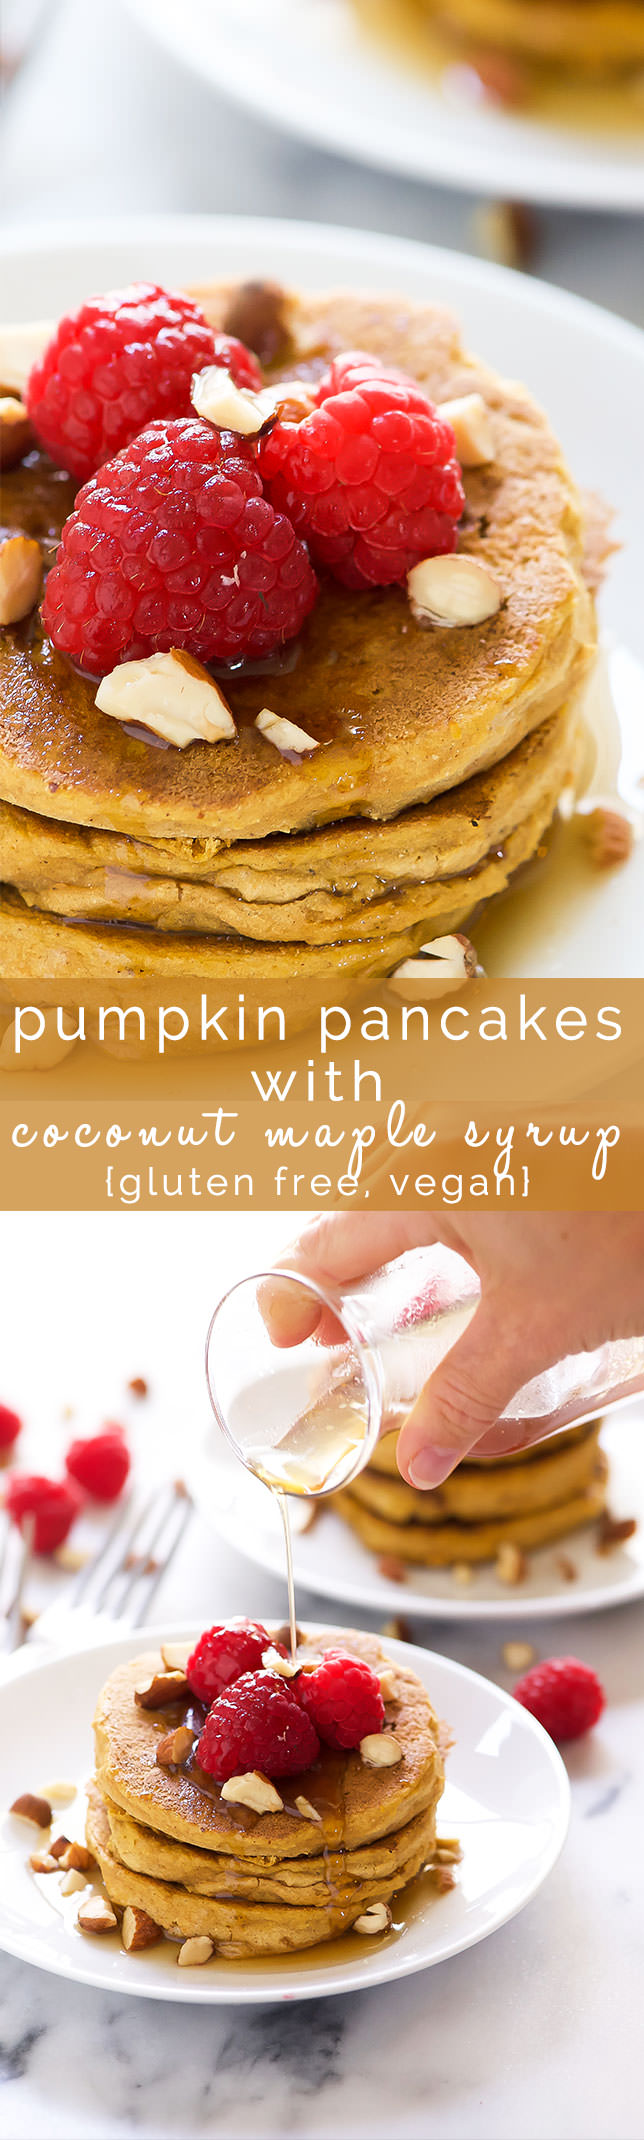 Gluten Free Pumpkin Pancakes are filled with fall flavors! They are super fluffy, have a touch of sweetness and finished with a warm coconut maple syrup! The ideal fall breakfast!